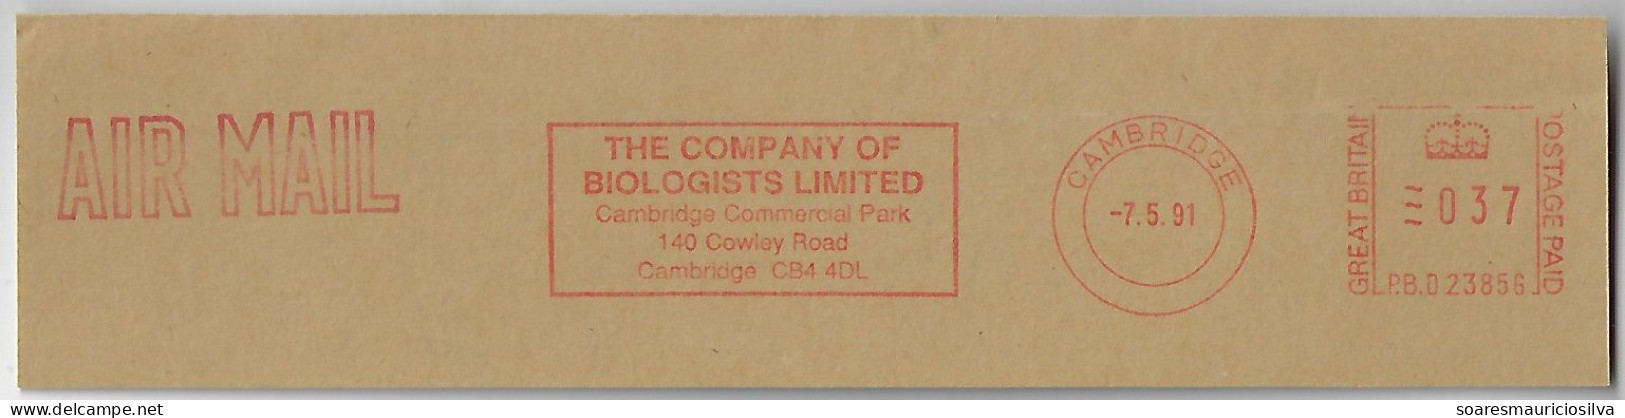 Great Britain 1991 Cover Fragment Meter Stamp Pitney Bowes 6300 Series Slogan The Company Of Biologists Ltd In Cambridge - Covers & Documents